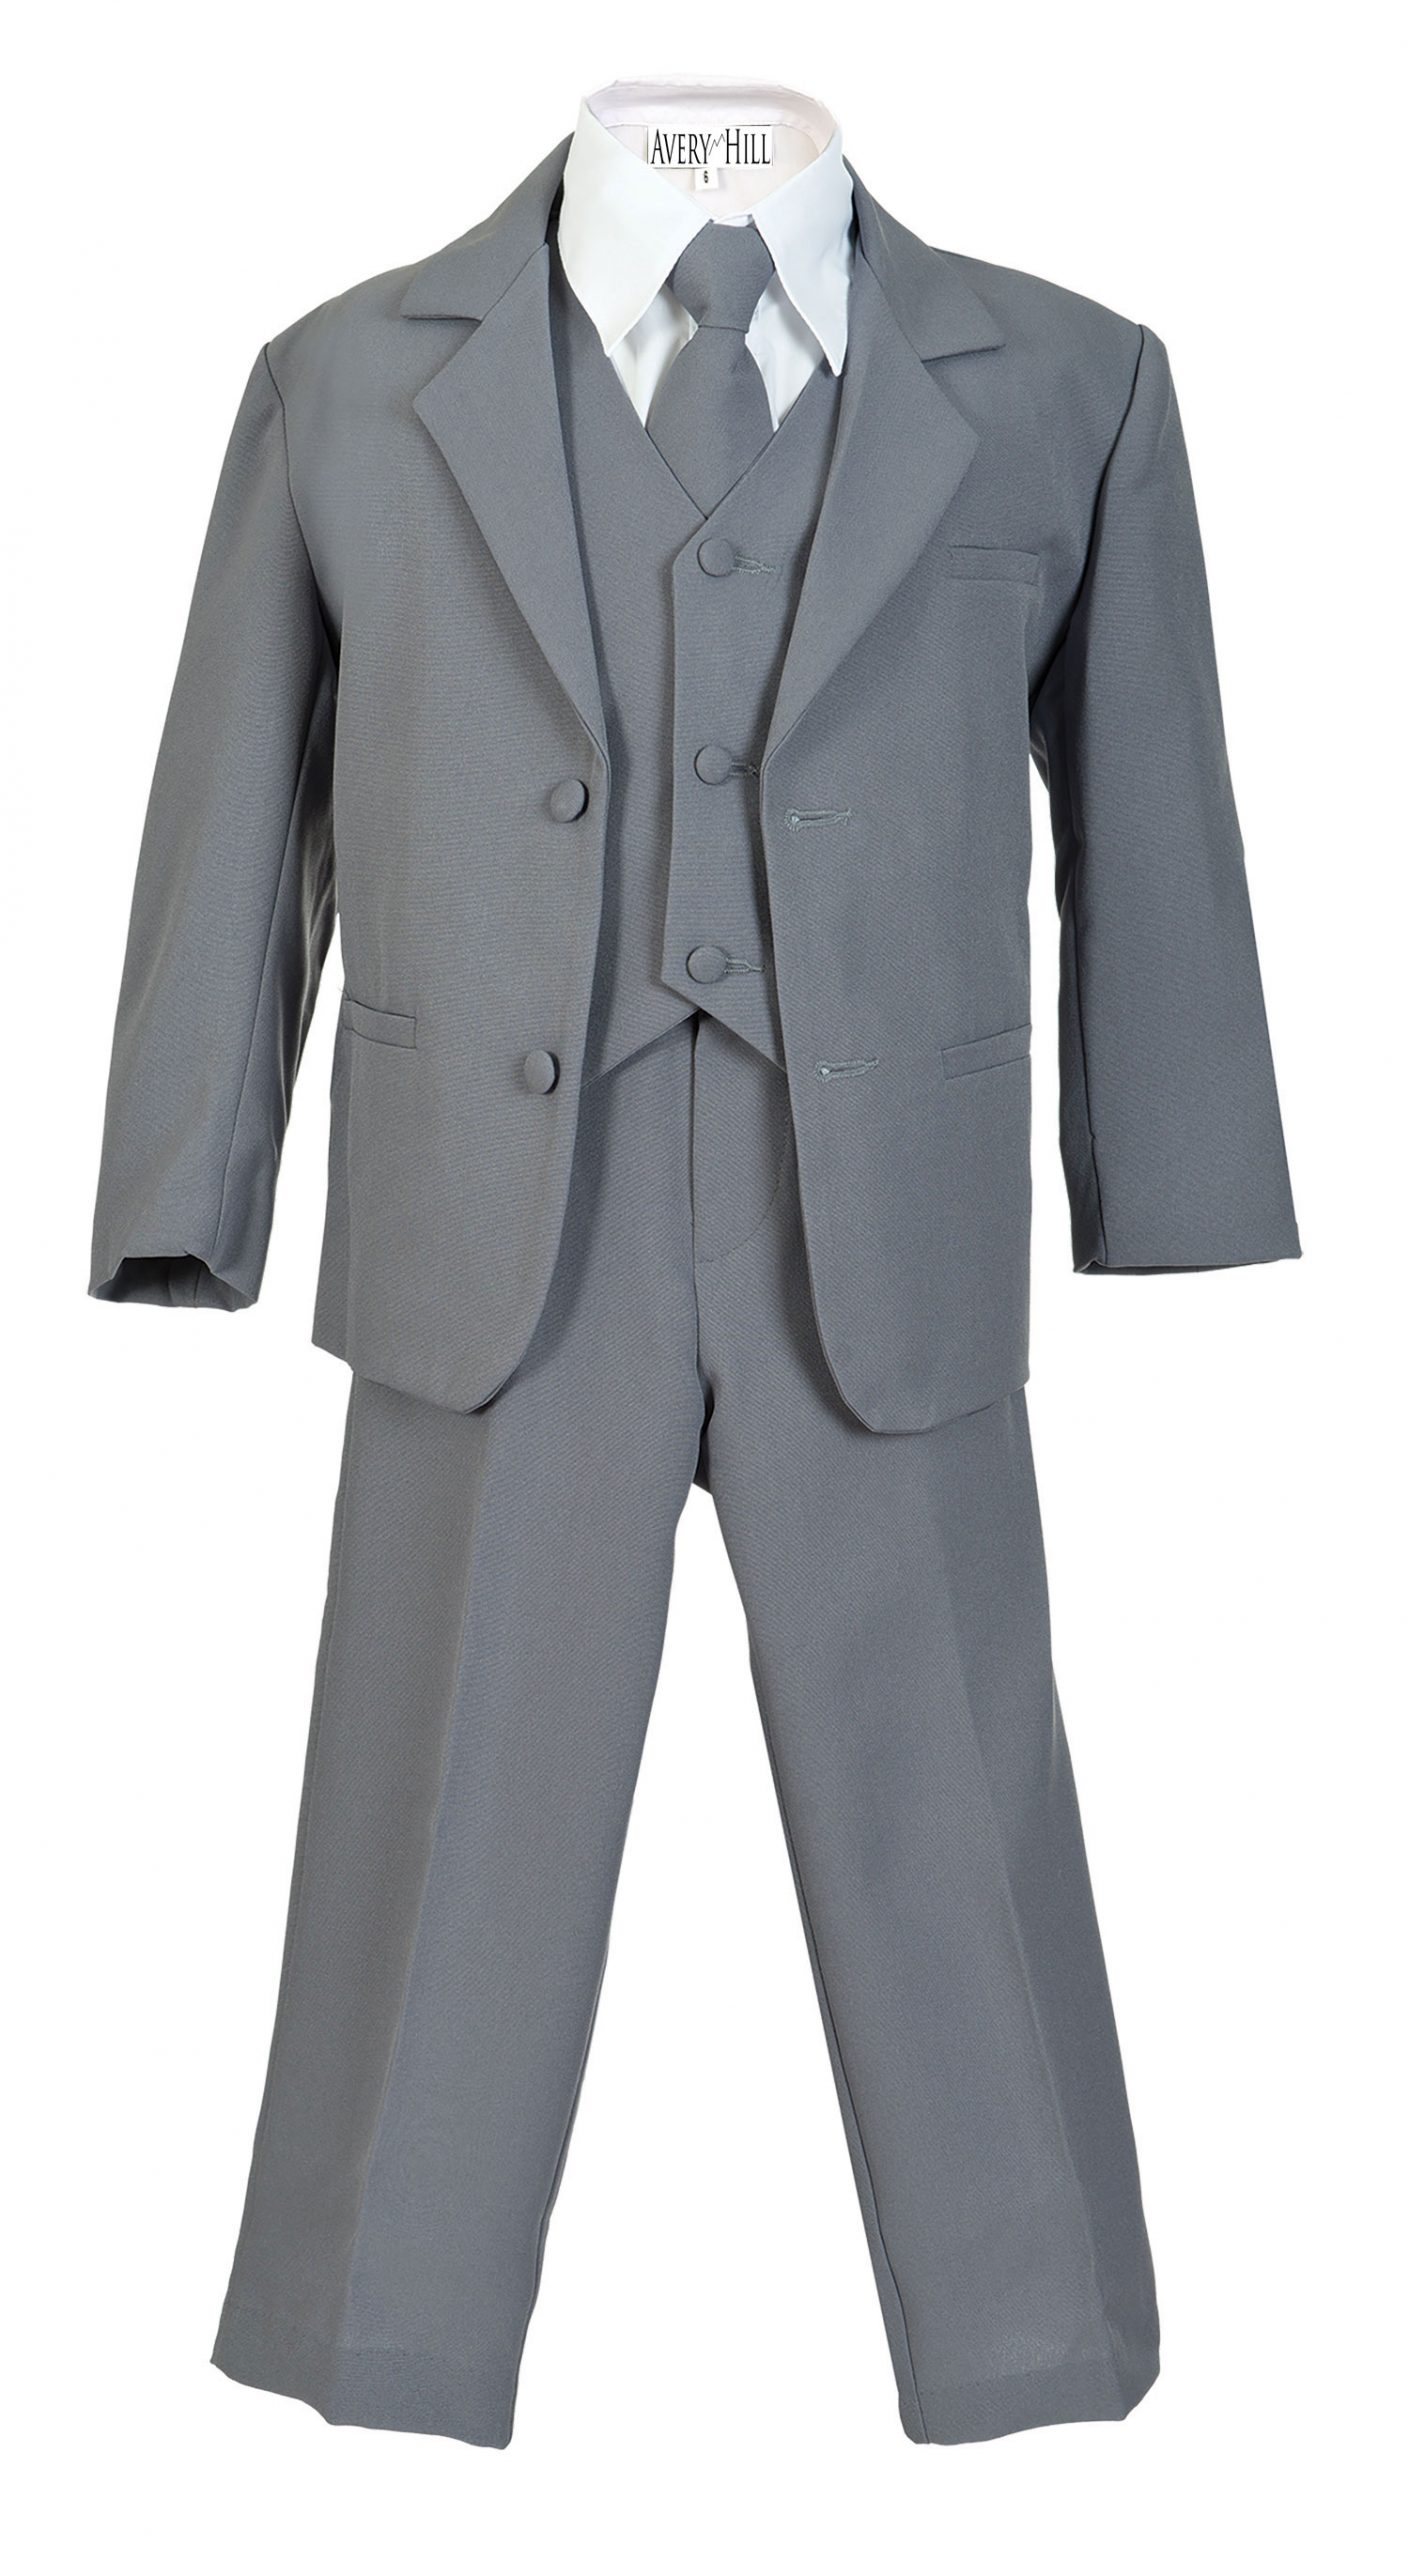 Avery Hill Boys Formal 5 Piece Suit with Shirt and Vest Slate Gray - 3T